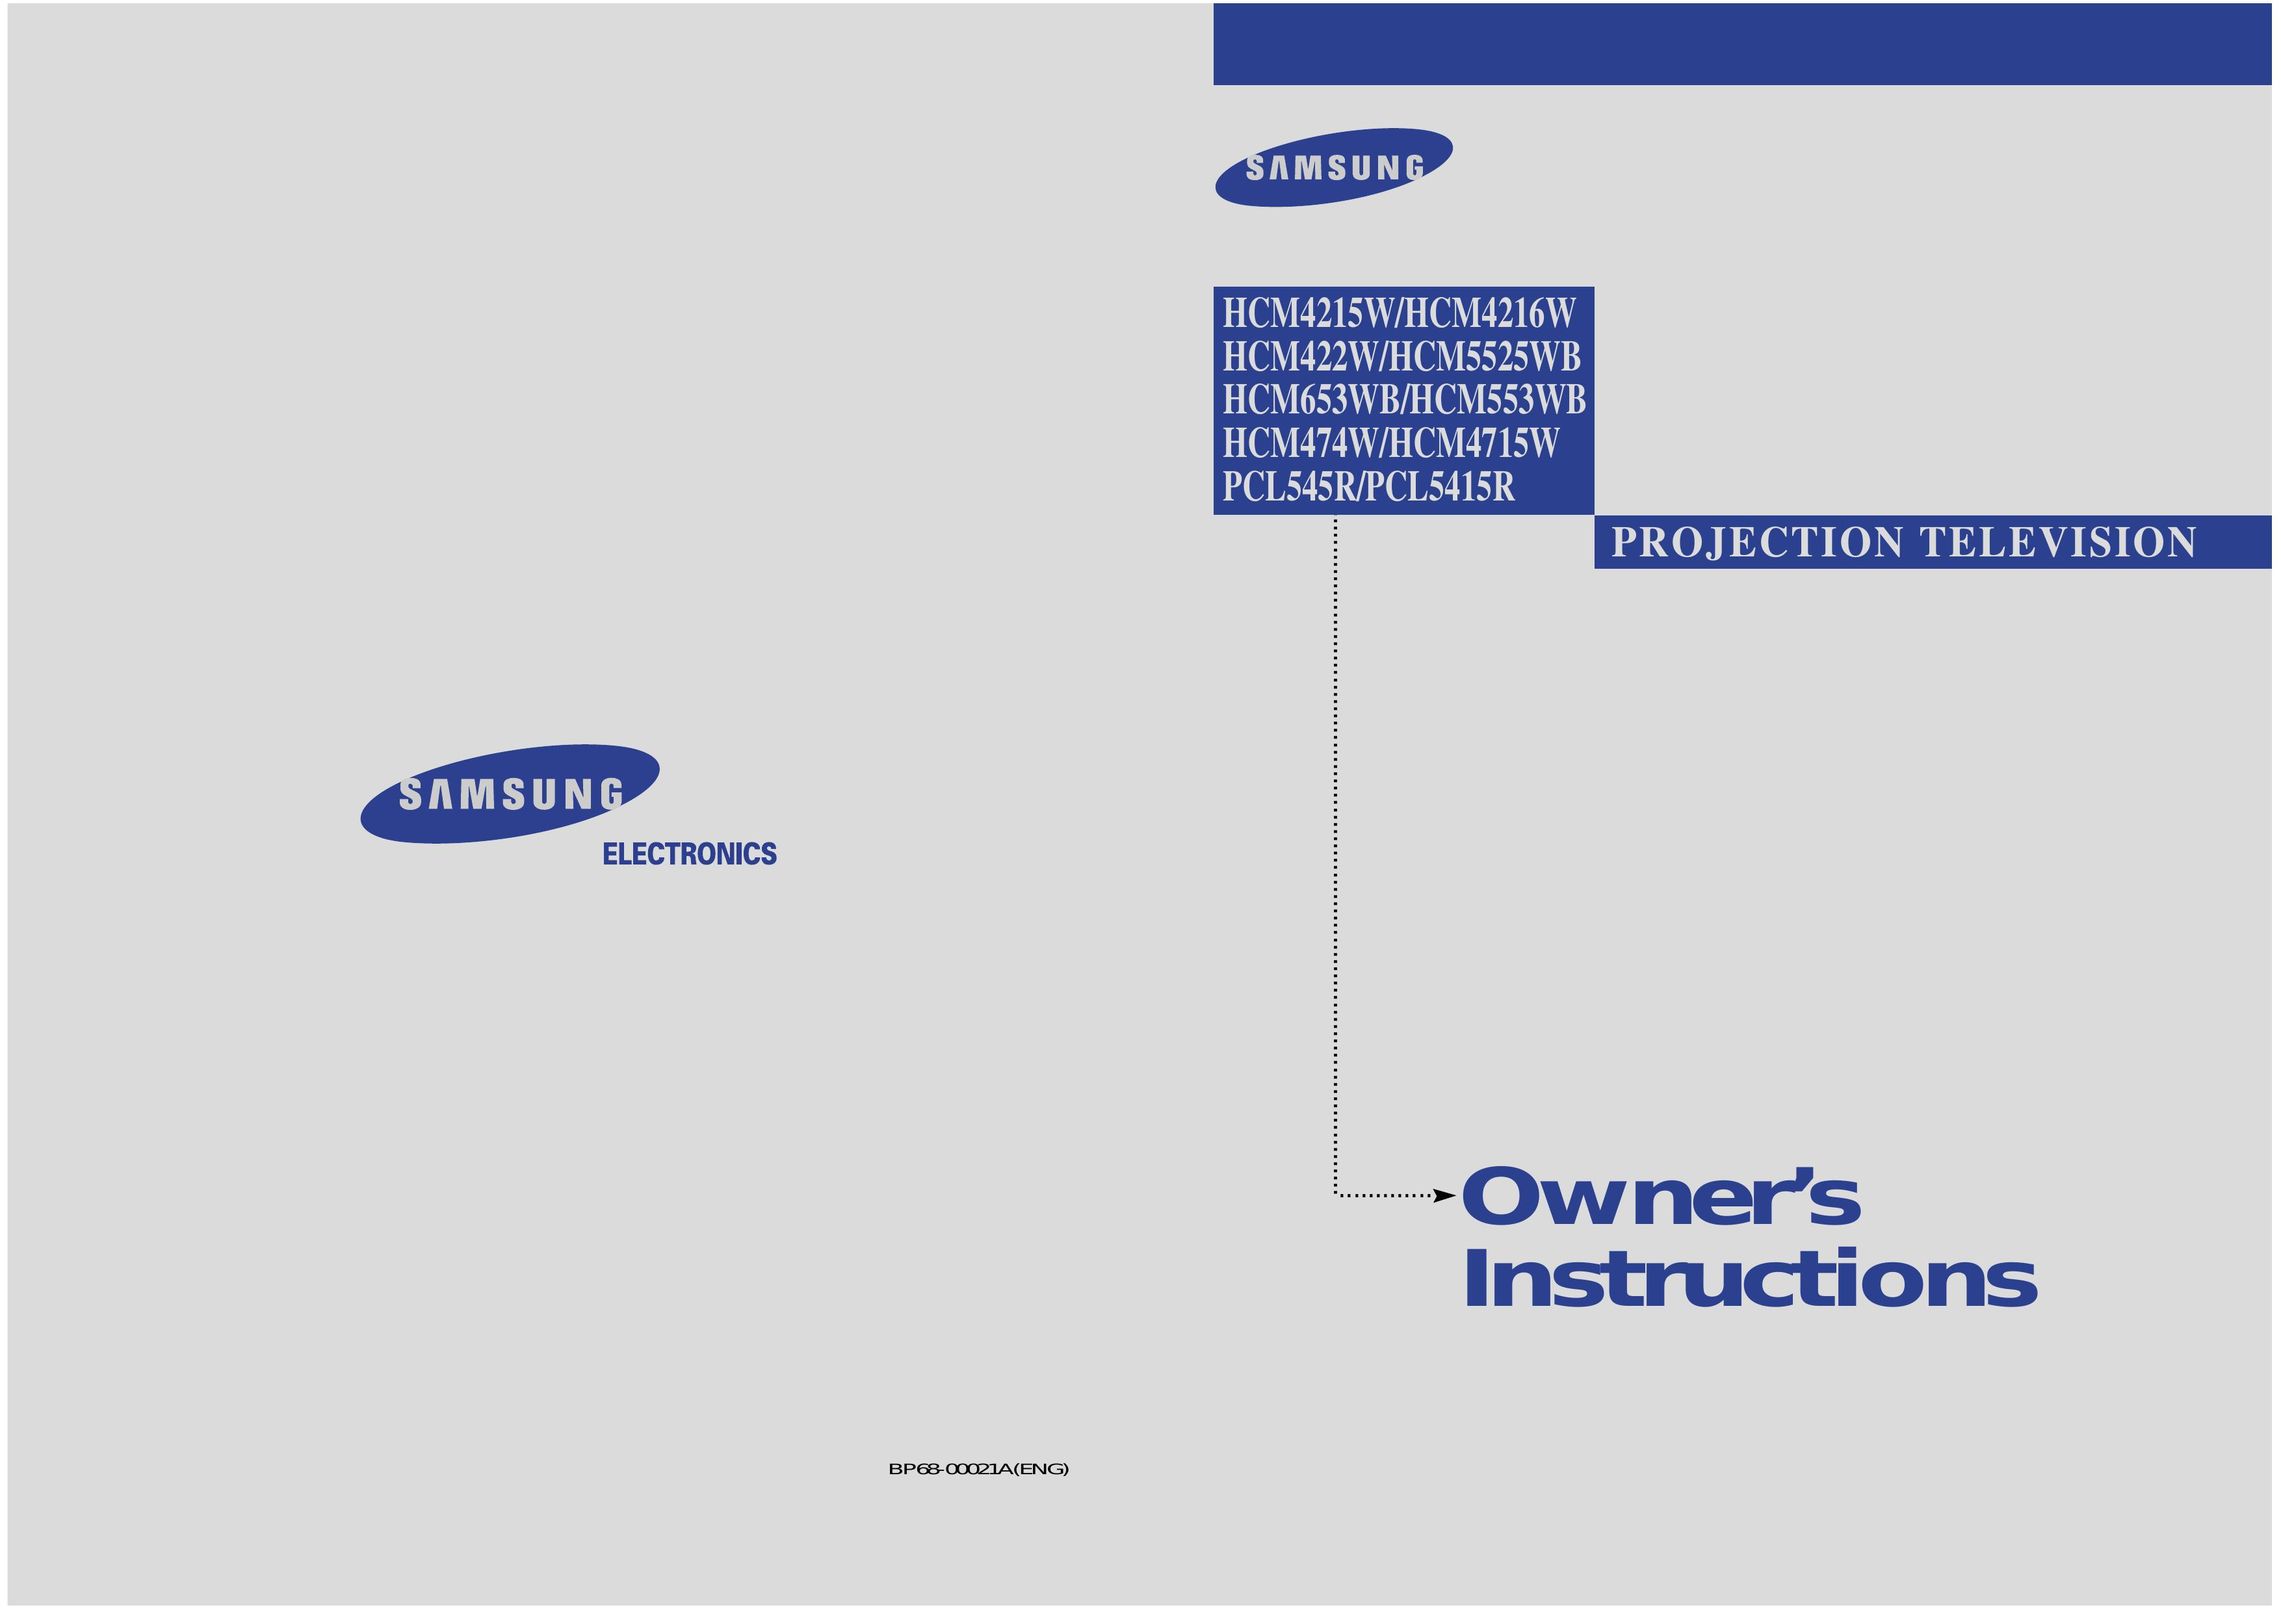 Samsung HCM553WB Projection Television User Manual